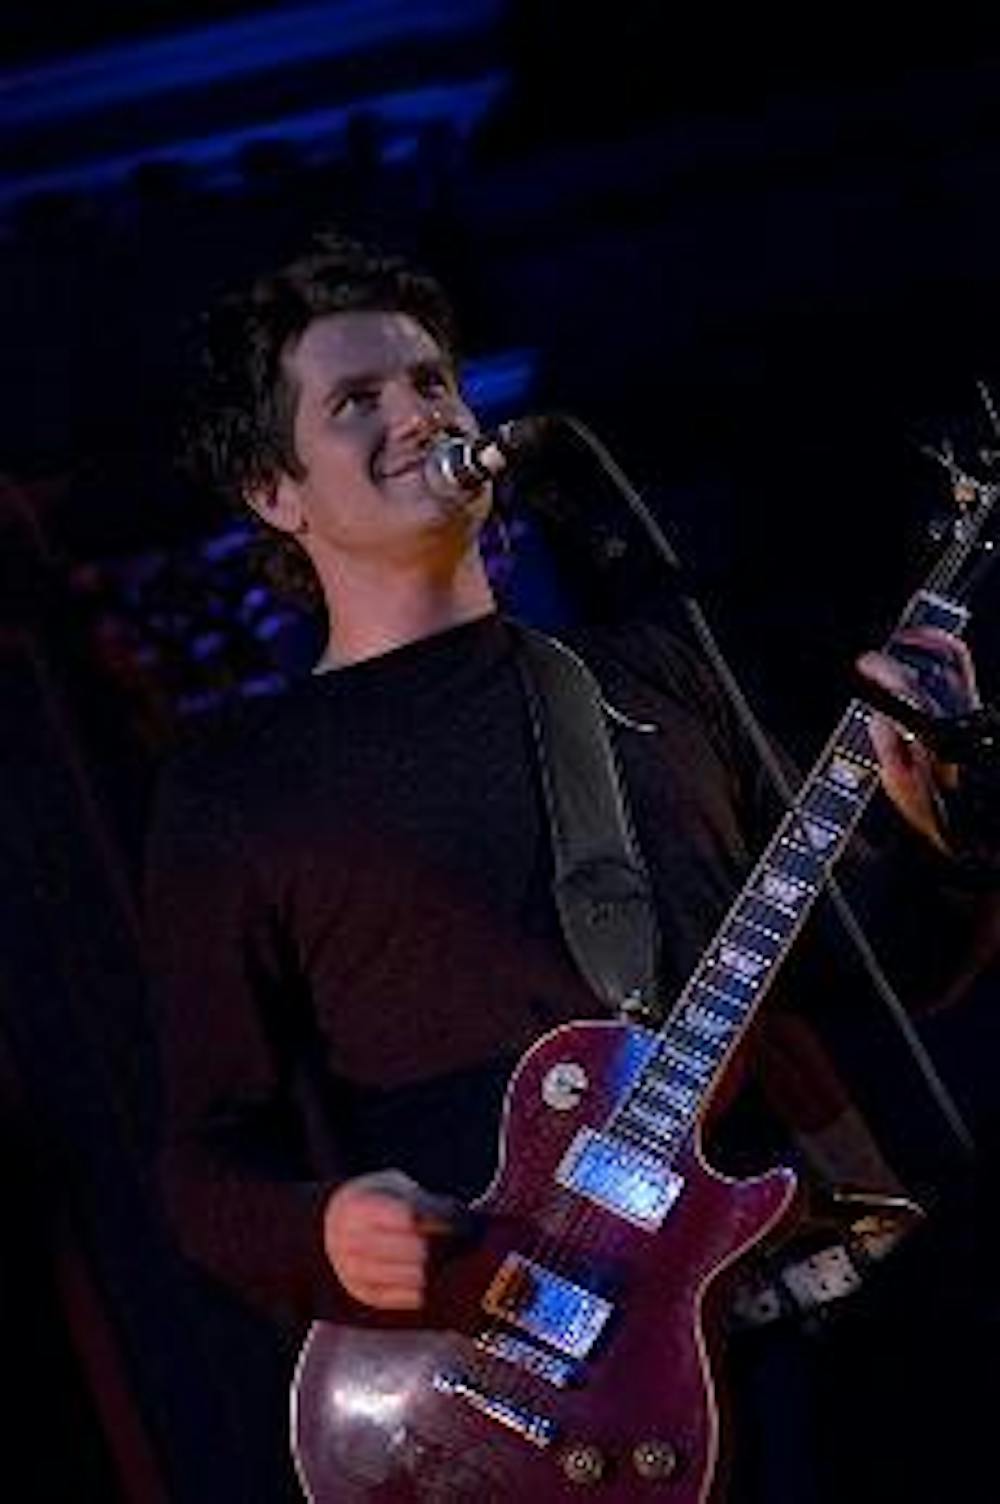 SOME MAD HOPE - Bostonian rocker Matt Nathanson, who prides himself on his ability to look past the views of mainstream media, will showcase his talents to the Tavern on Saturday.